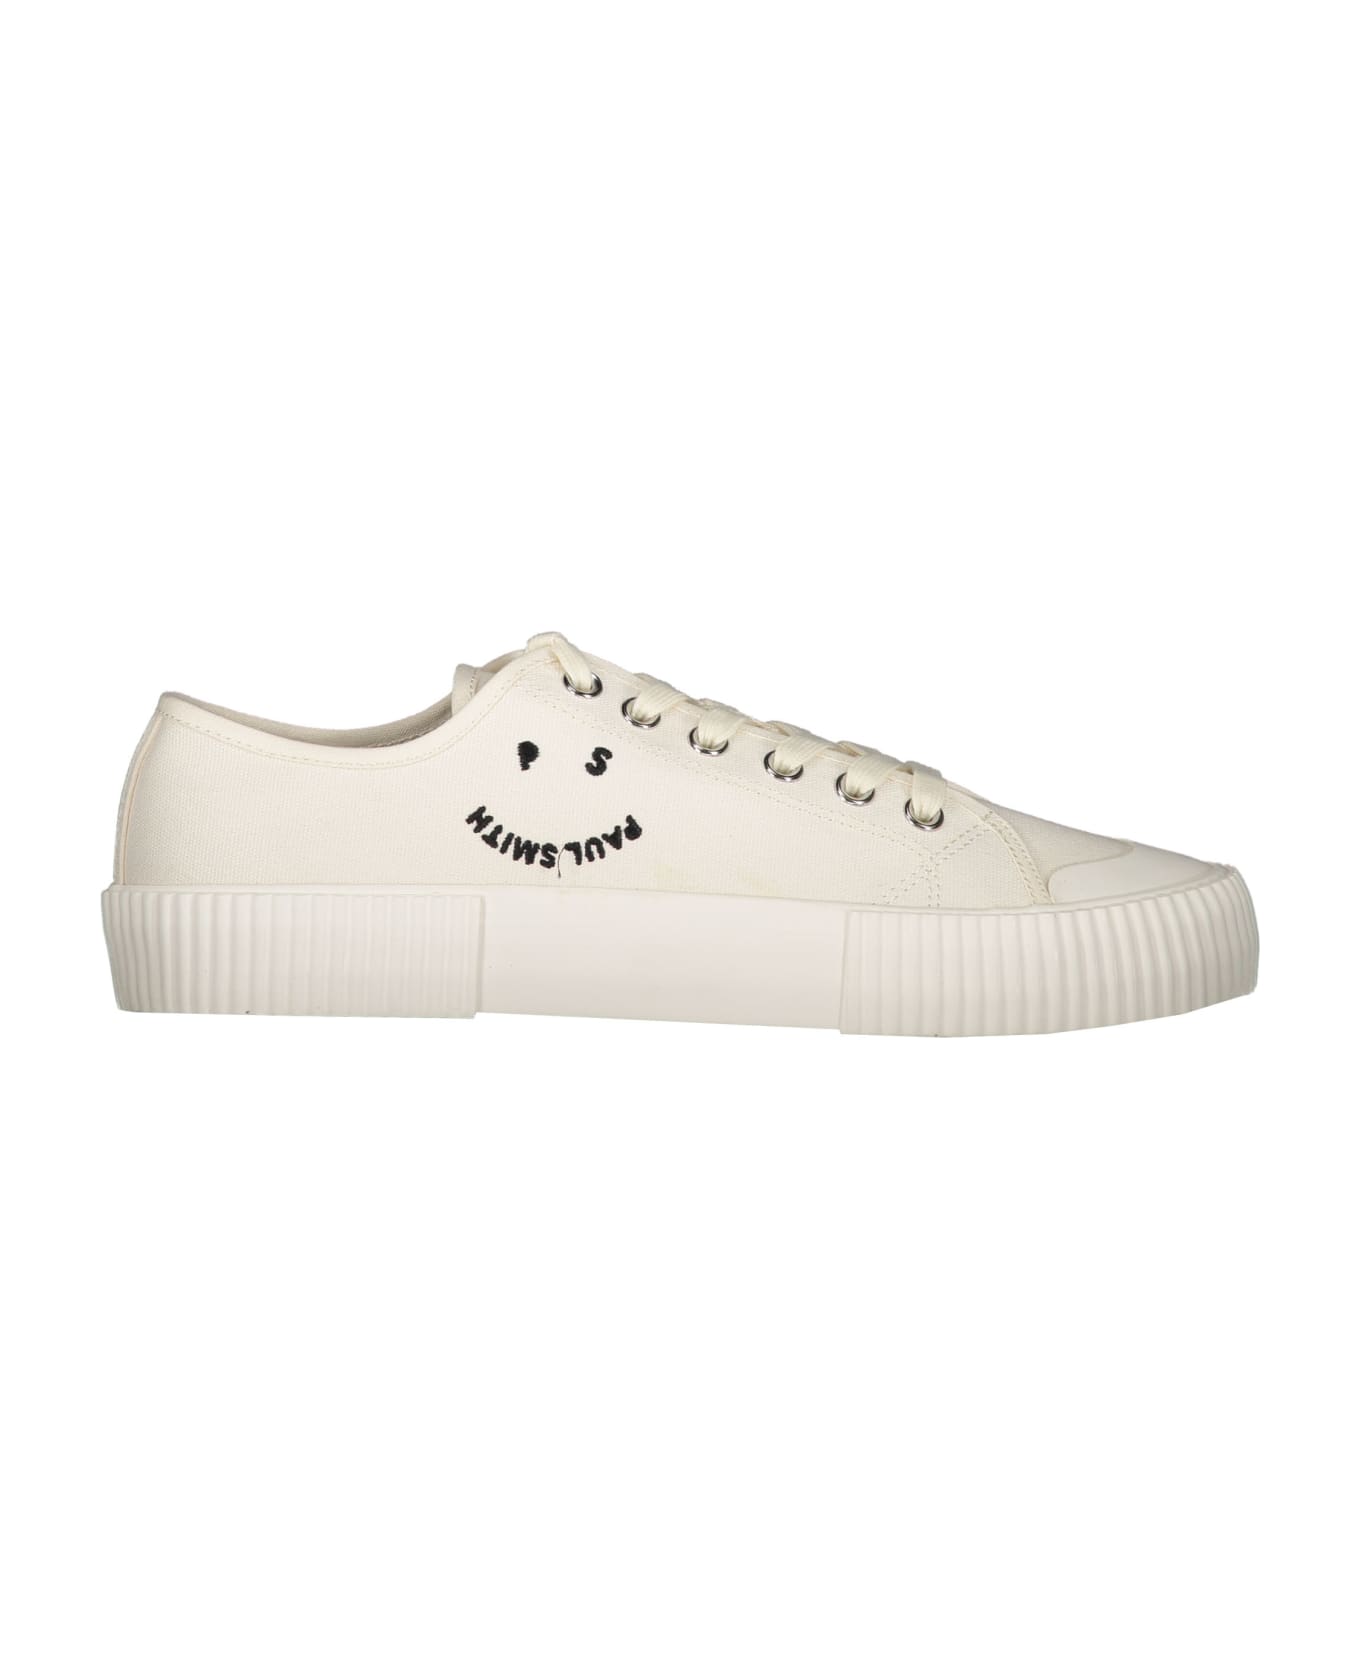 Paul Smith Canvas Low-top Sneakers - White